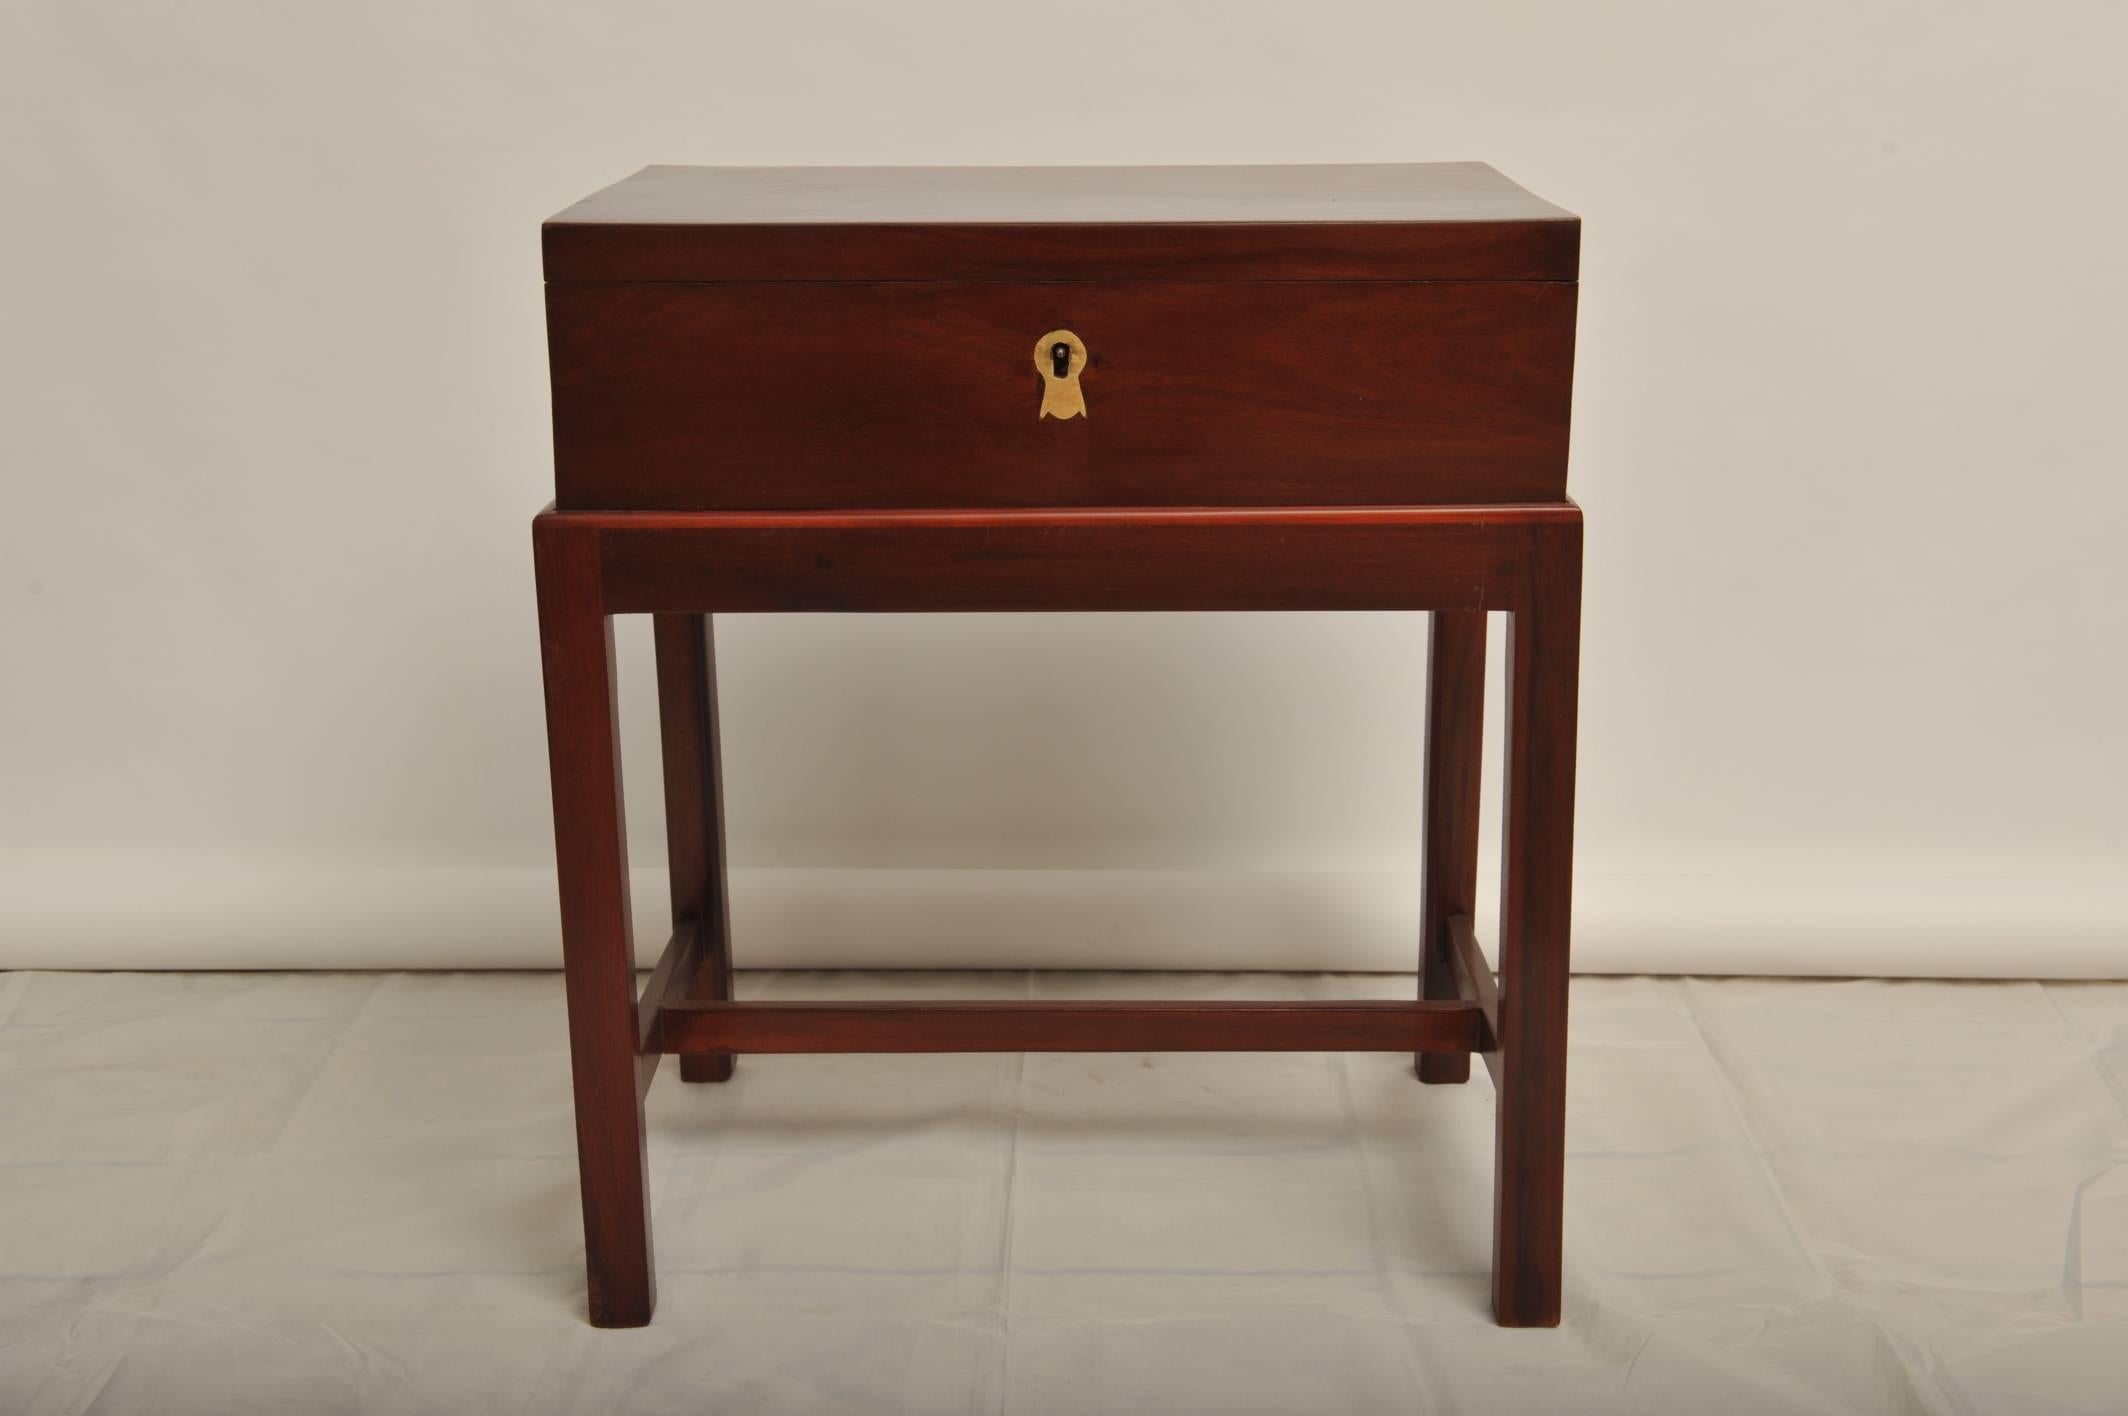 Late 19th century British Campaign mahogany officer's chest on custom-made mahogany stand. Brass handles, fitted interior with secret compartments. Simple and elegant, designed to use as a side table. Restored.